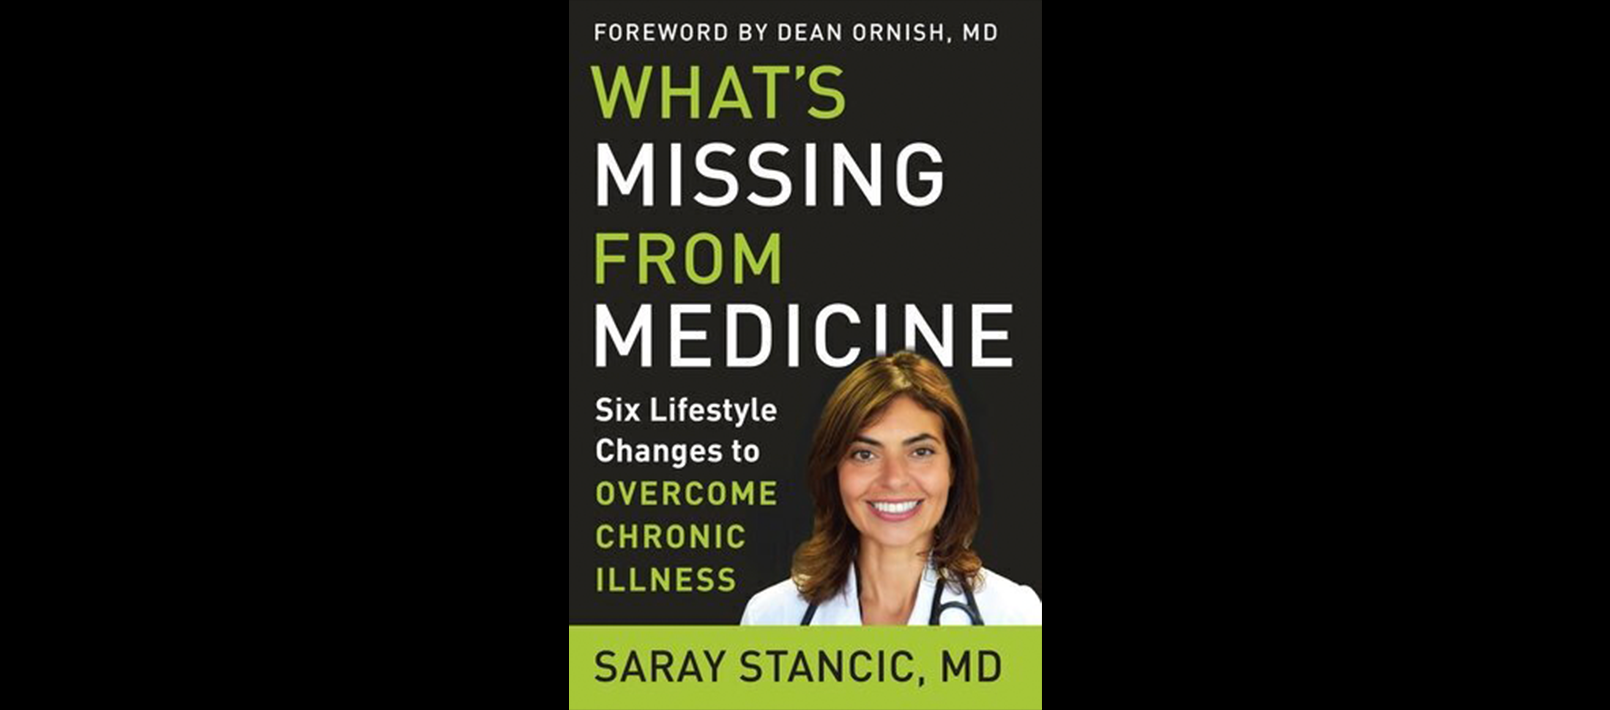 Book cover: What's Missing from Medicine: Six Lifestyle Changes to Overcome Illness by Saray Stancic, MD. Head shot of Dr. Stancic in bottom right of book cover.